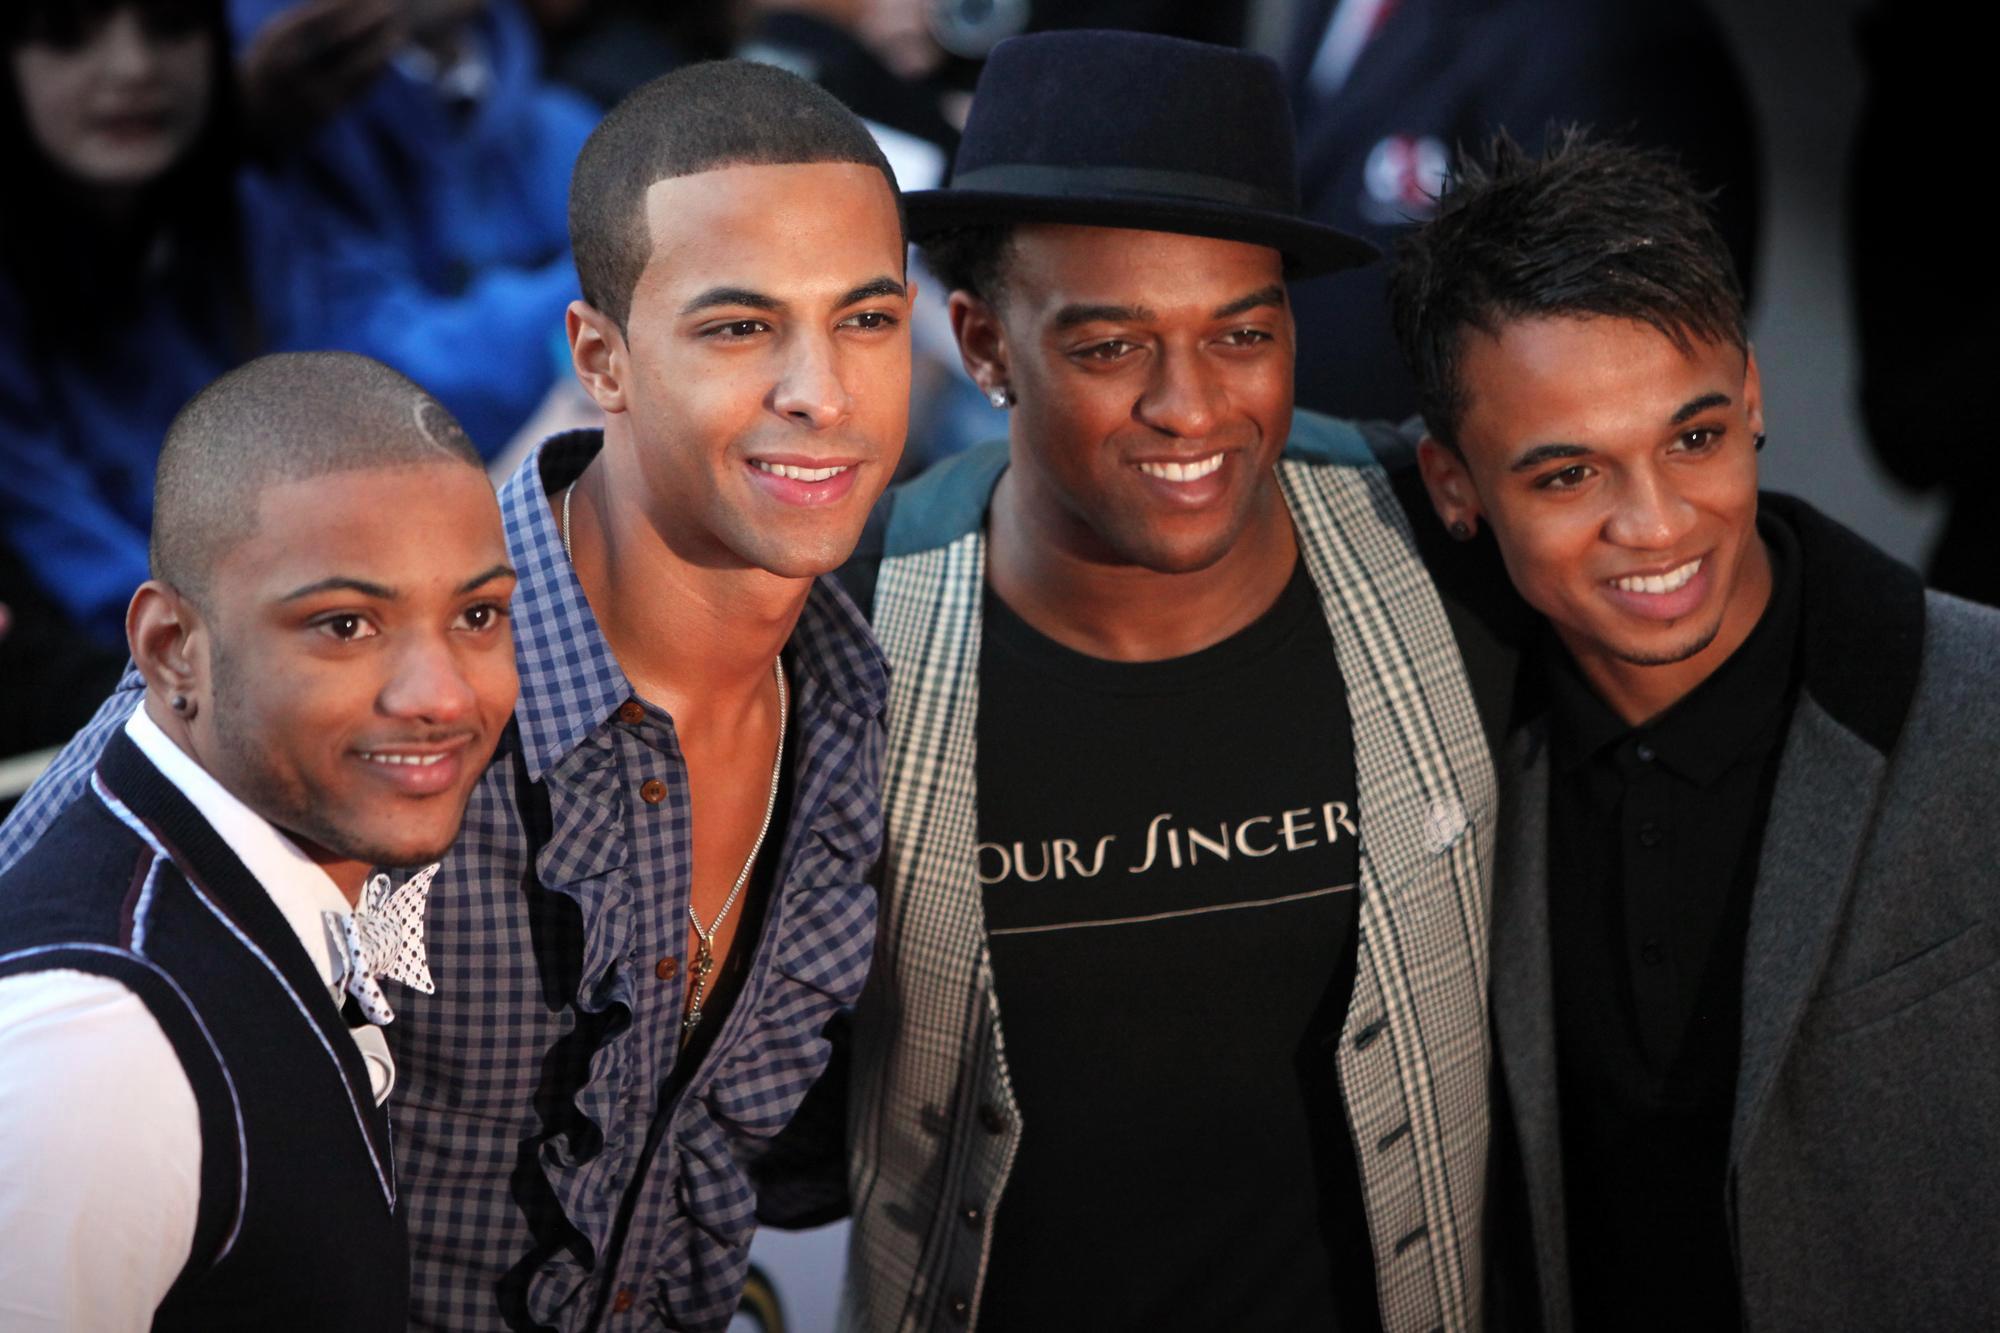 JLS Reunion Tour Turns Out To Be Their Greatest Fear!